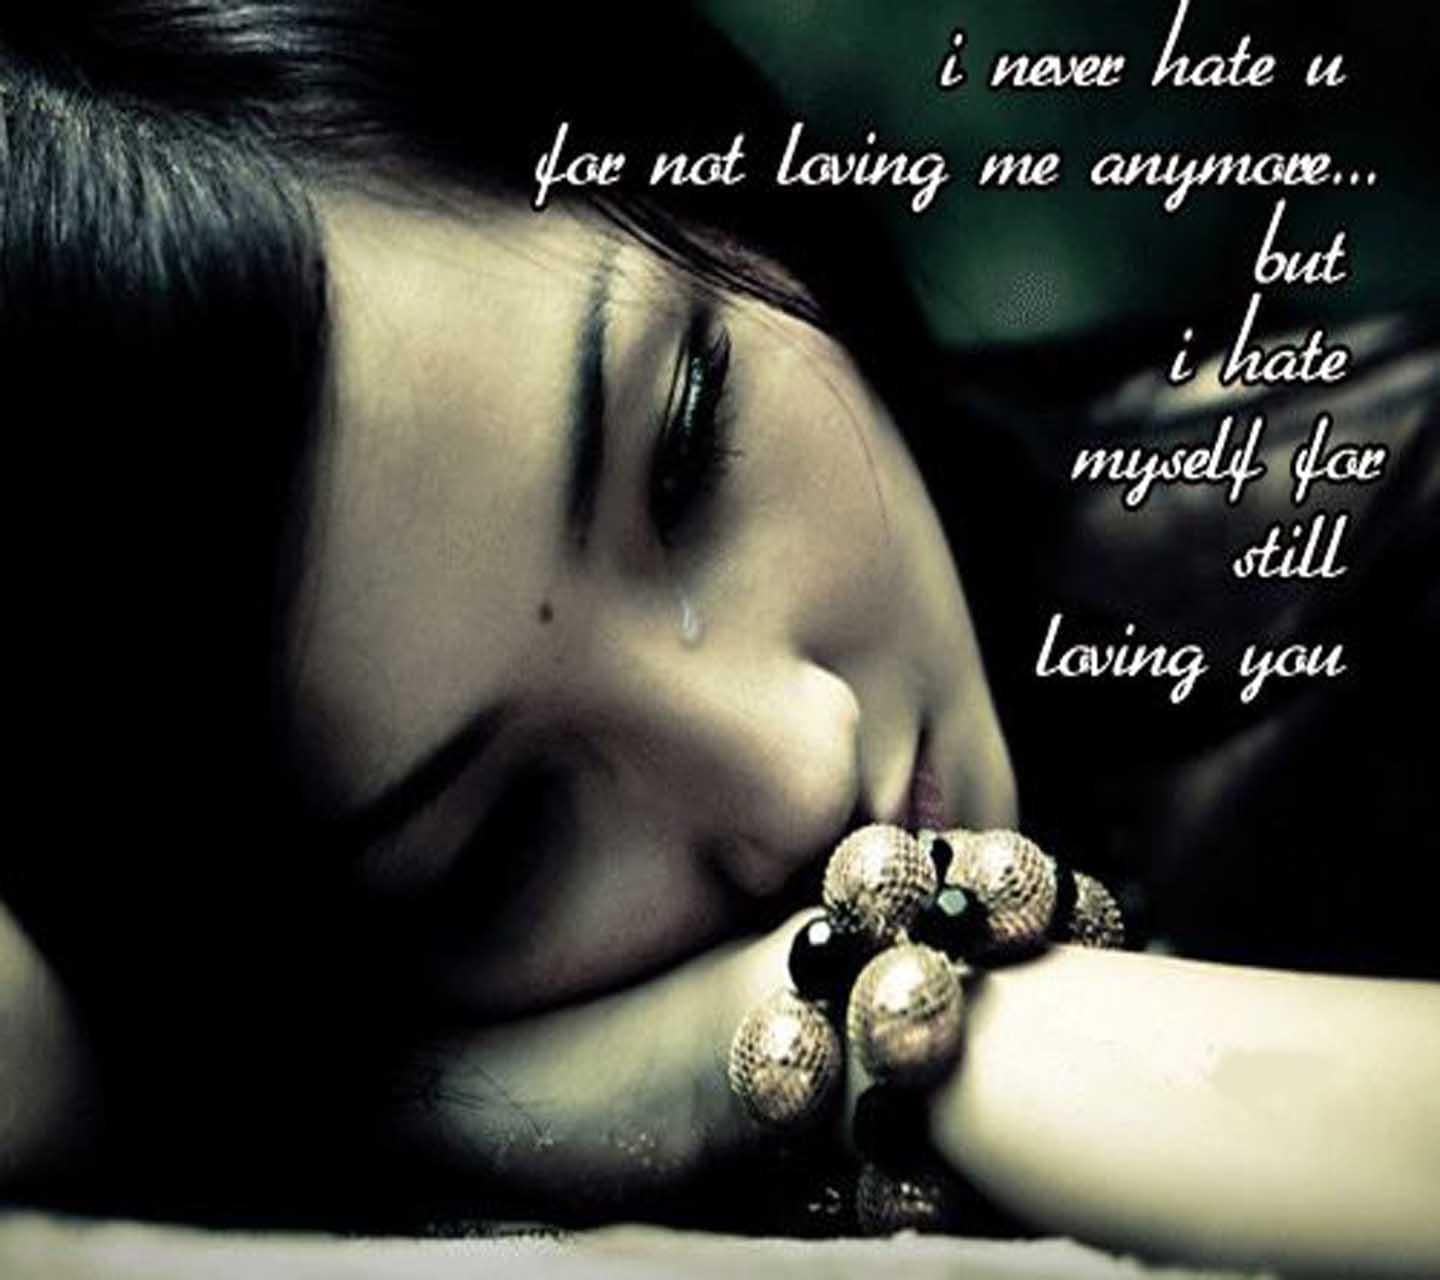 I Hate You Myself For Still Loving You